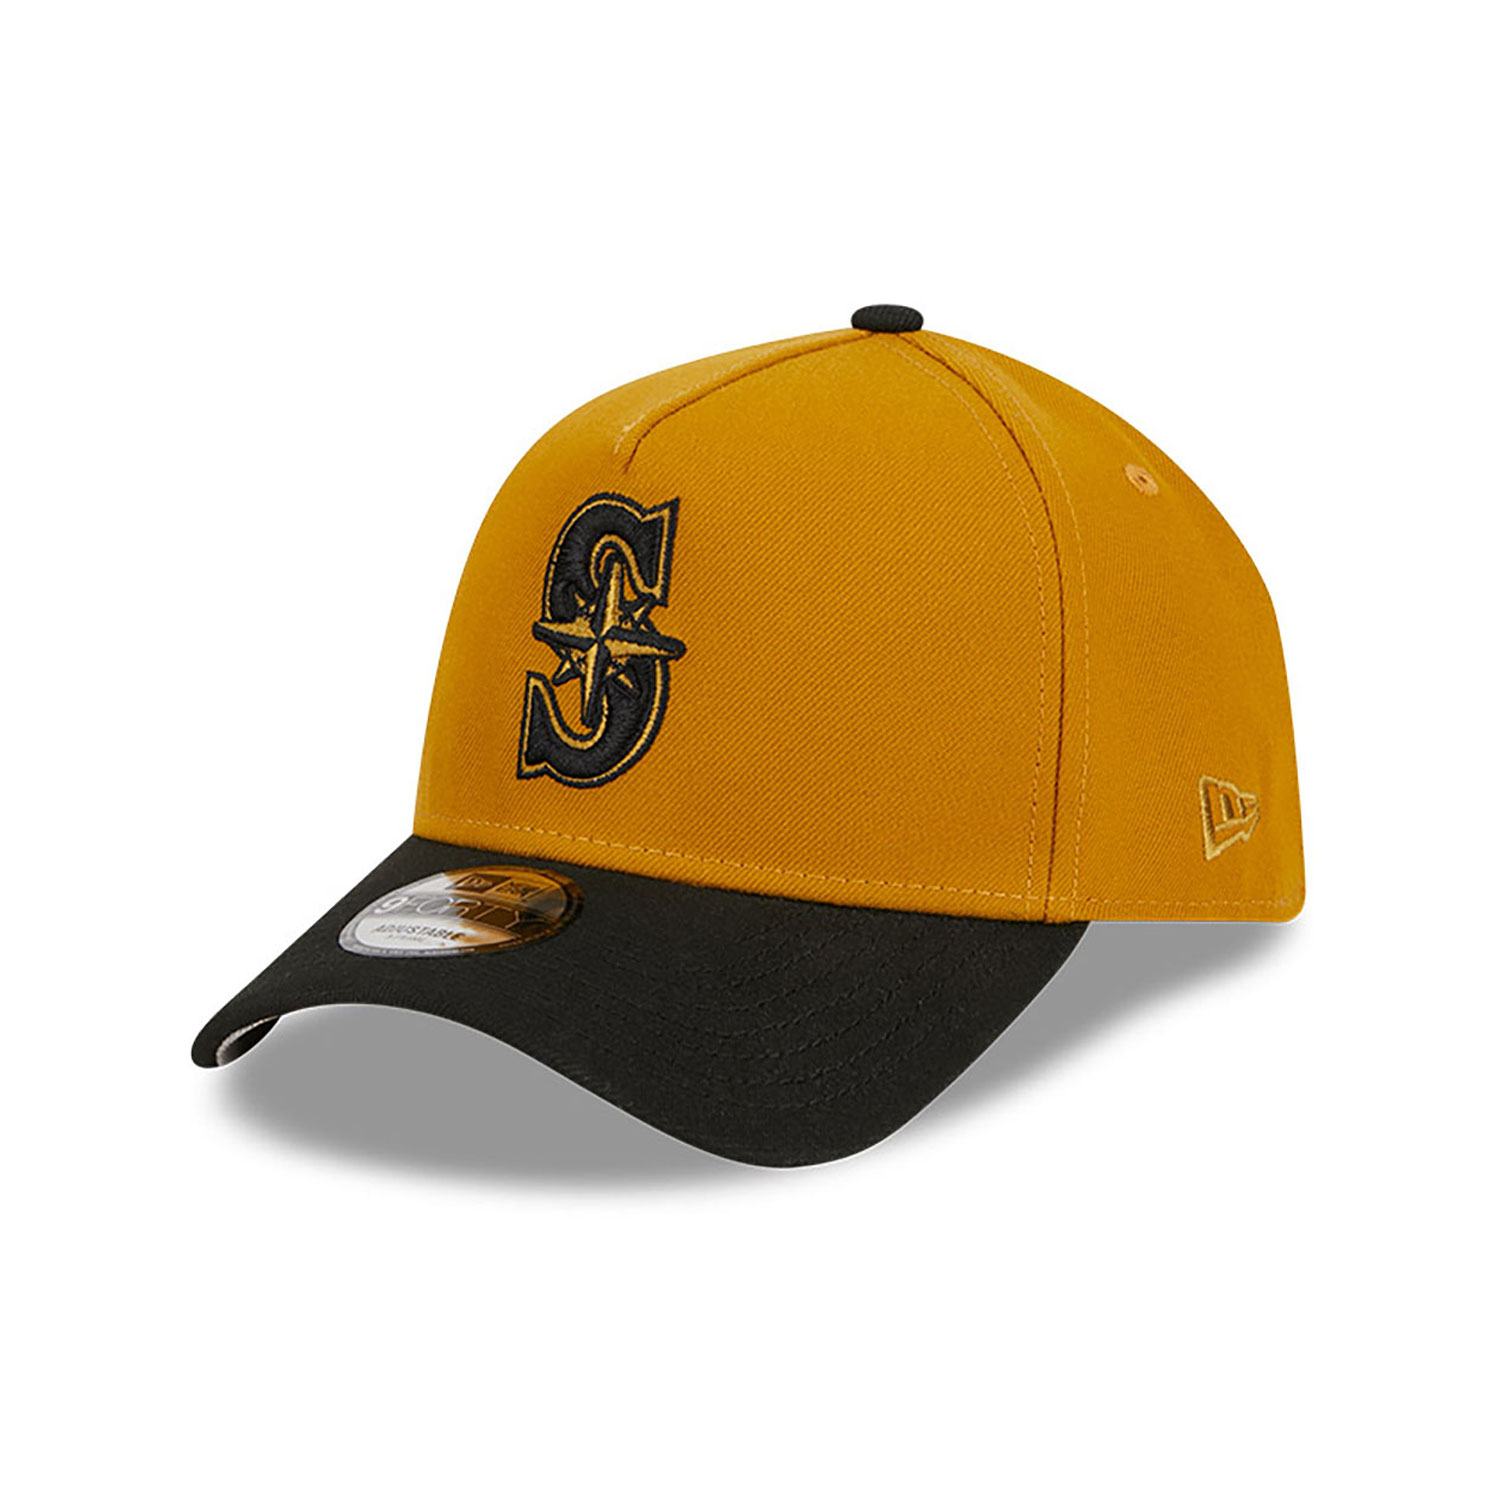 Seattle Mariners Rustic Fall Gold A-Frame 9FORTY Adjustable Cap